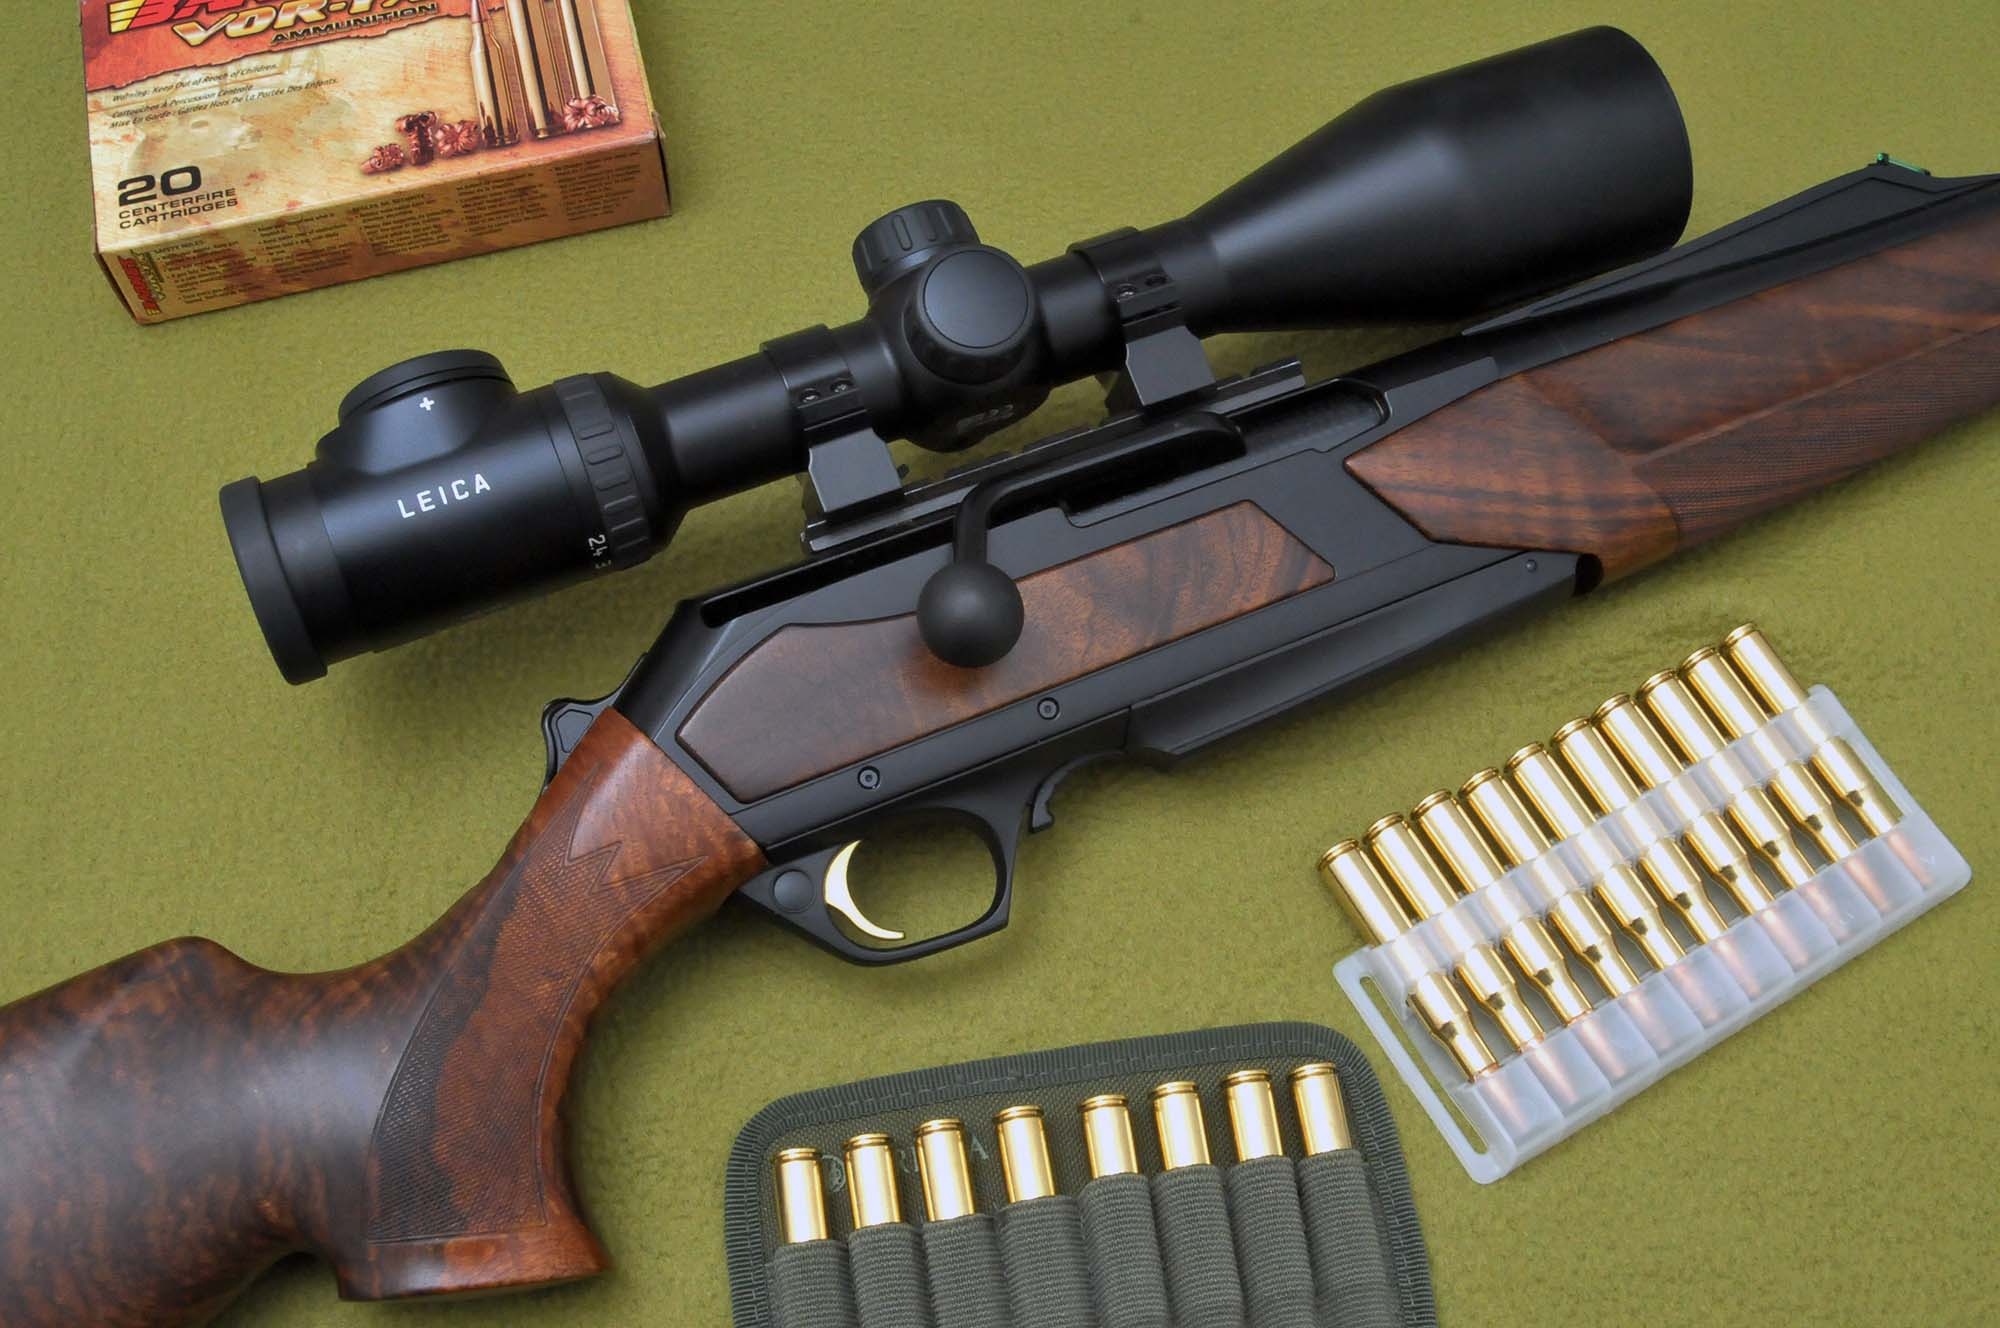 https://www.all4shooters.com/en/hunting/rifles/browning-maral-straight-pull/browning-maral-rifle.jpg